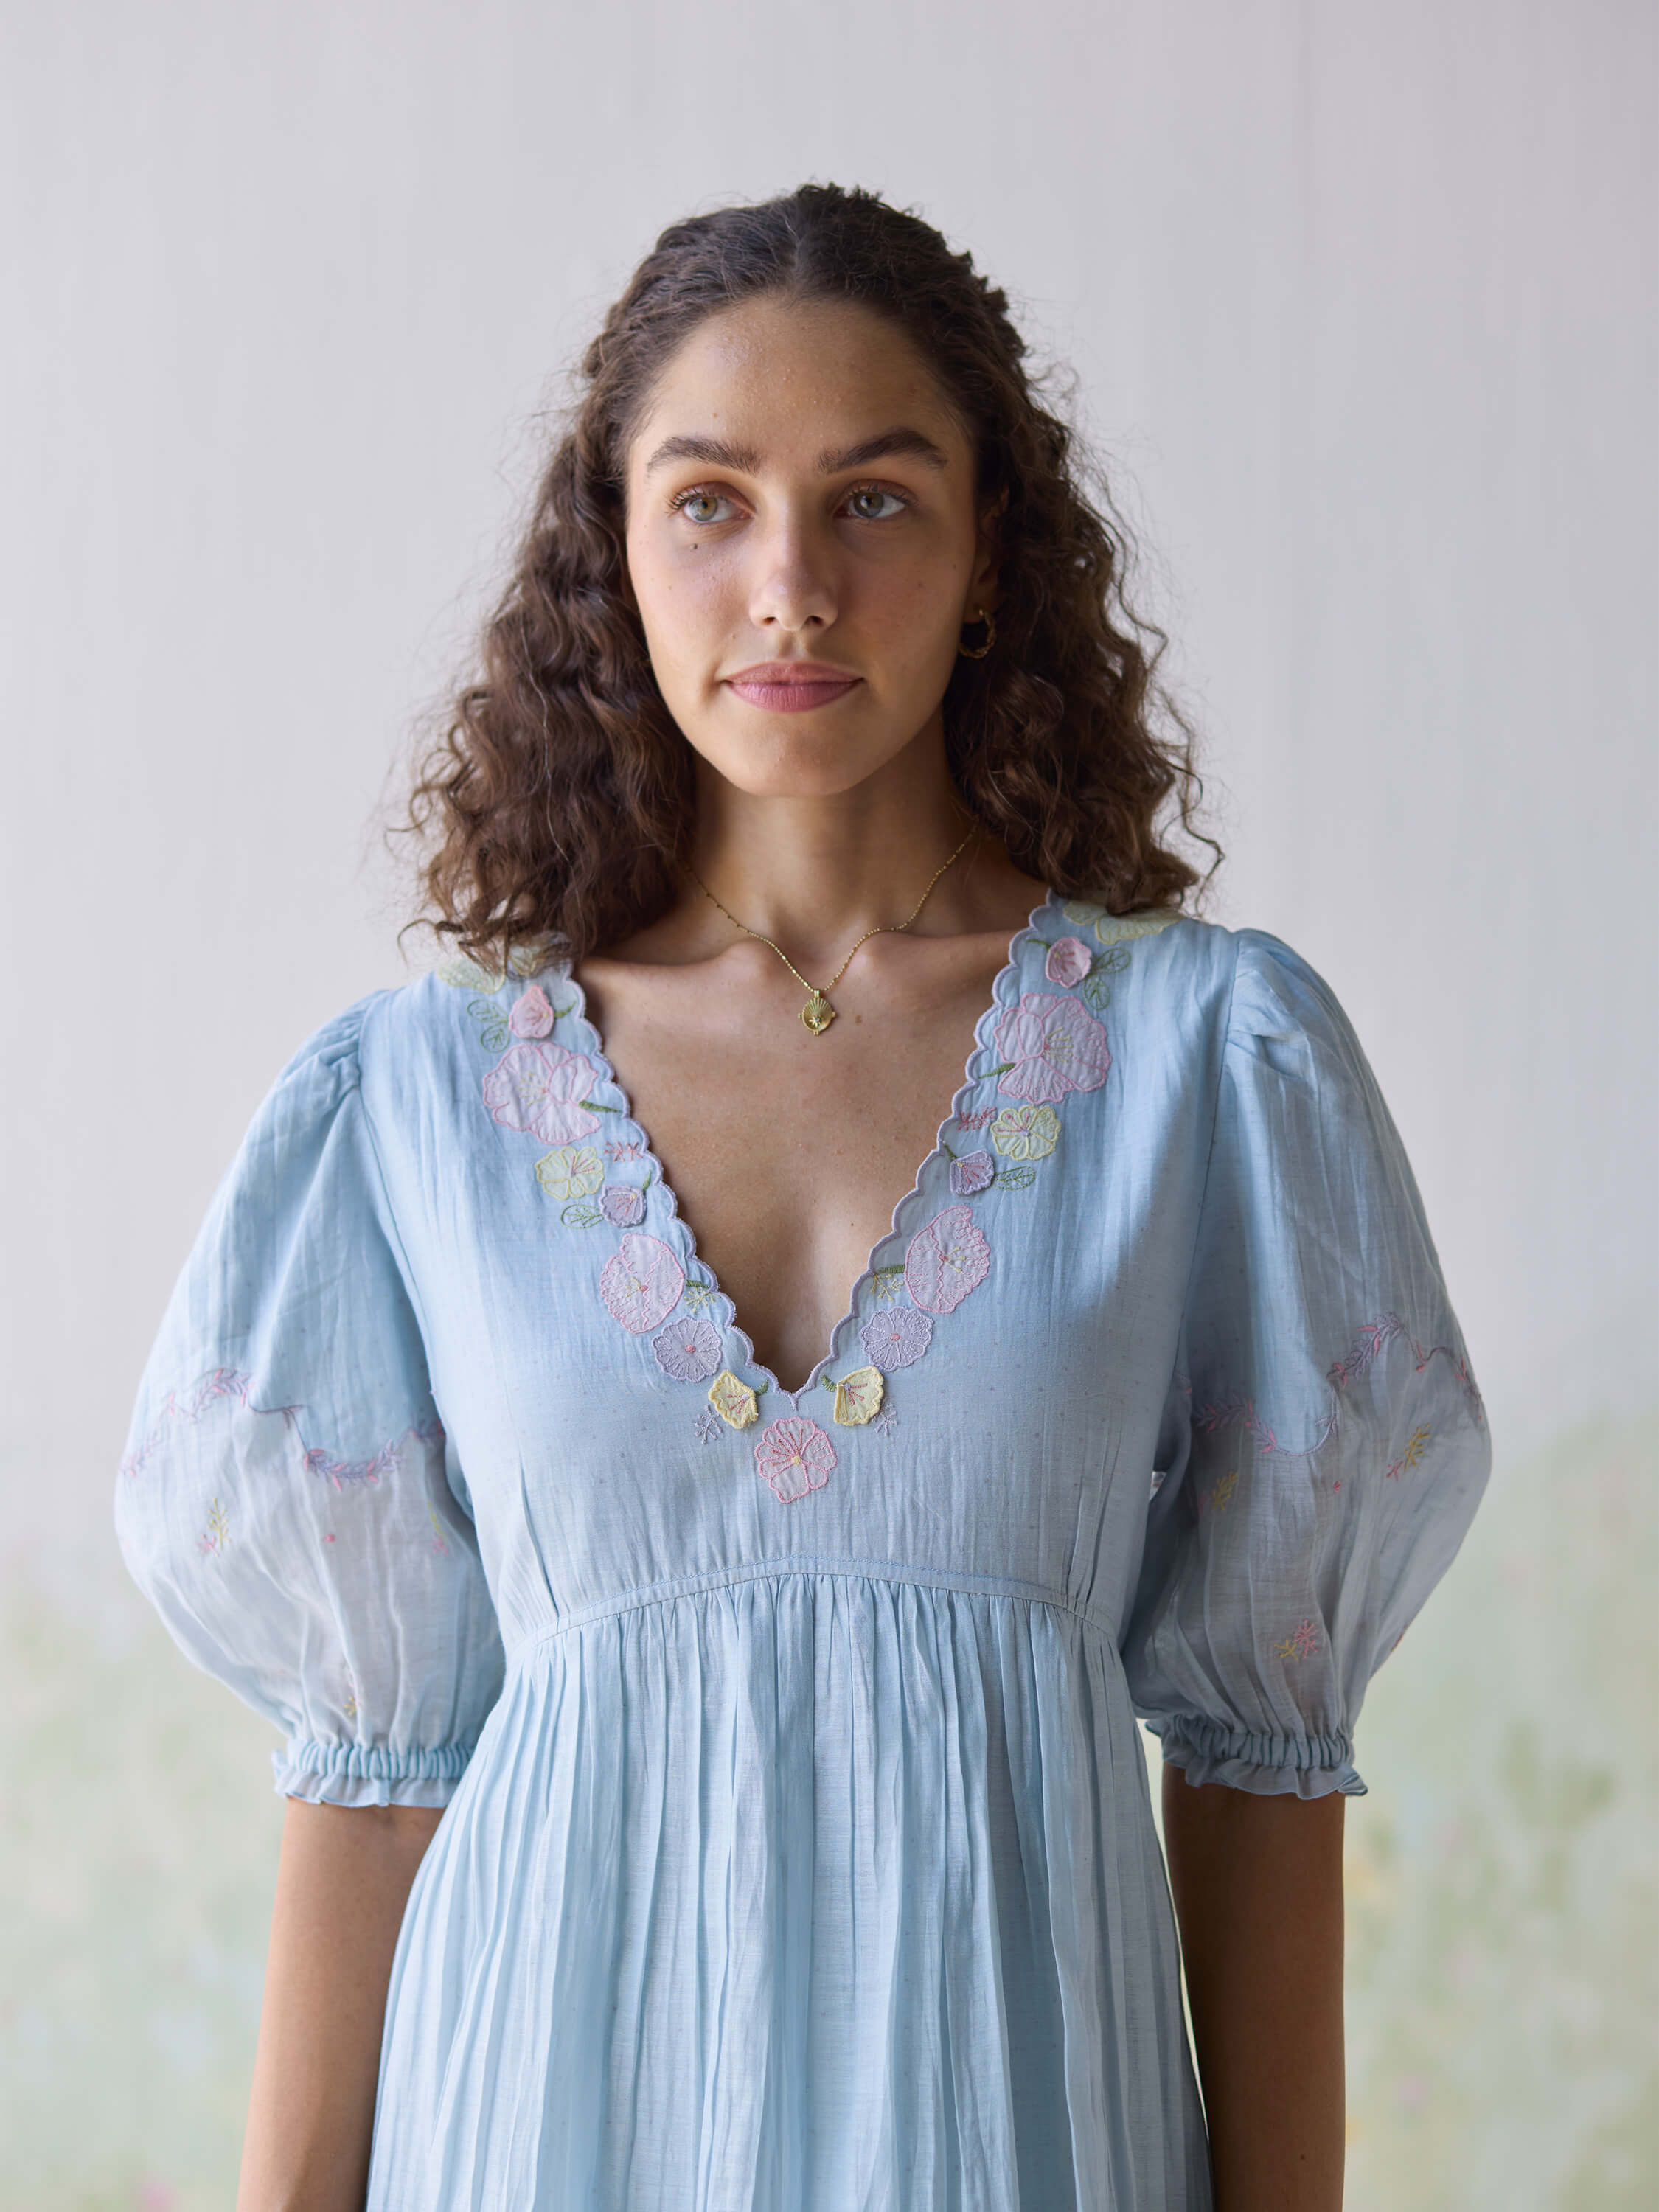 Woman wearing light blue dress with floral embroidery details.